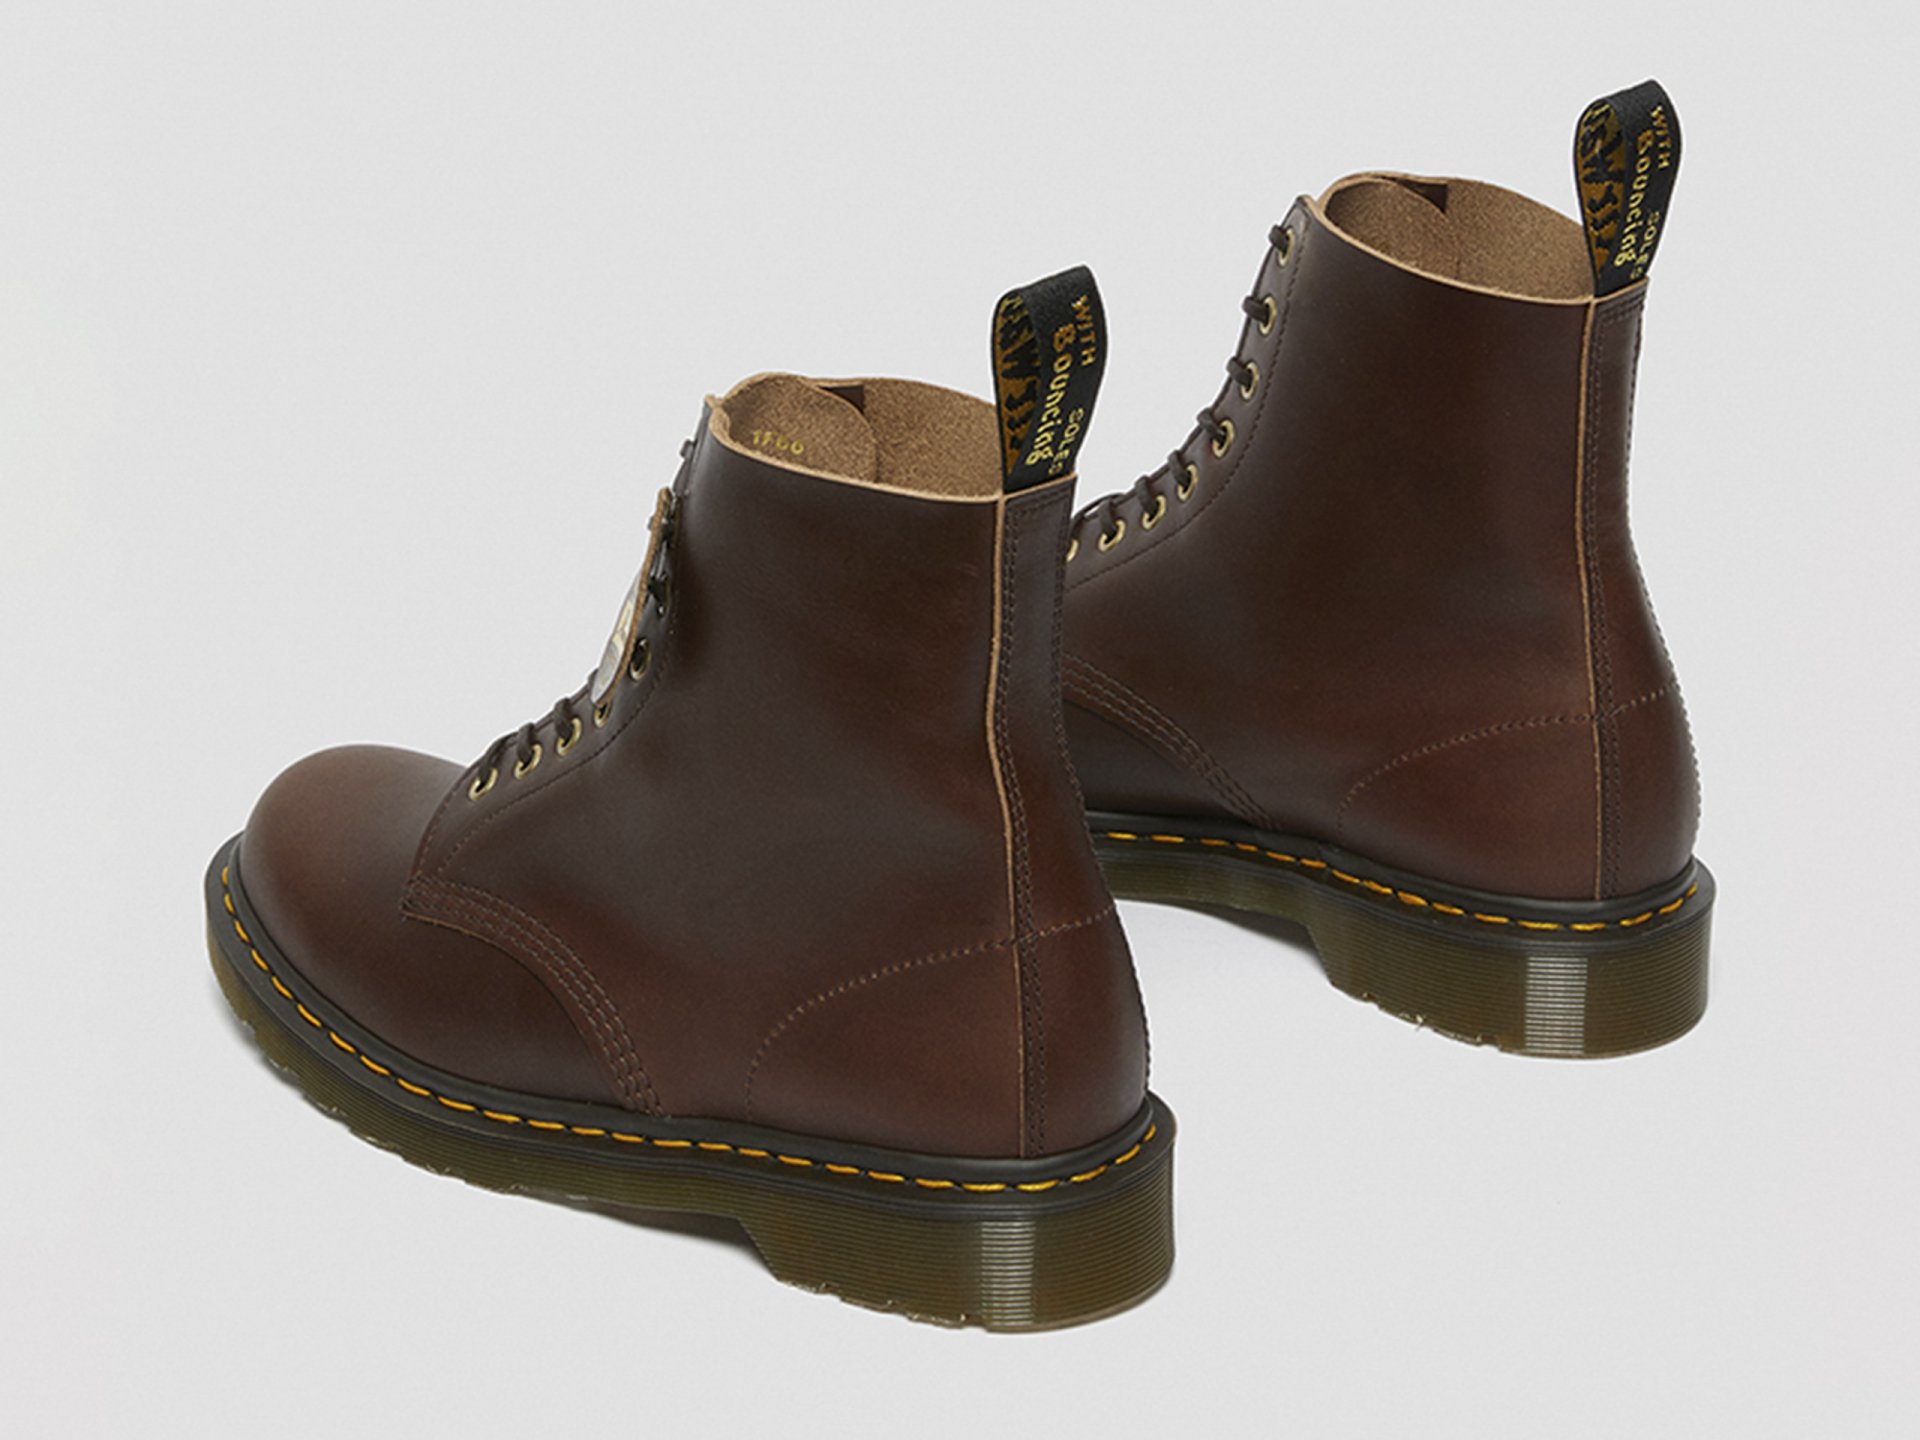 MIE 1460 PASCAL 8HOLE BOOT - Revolution Web Store